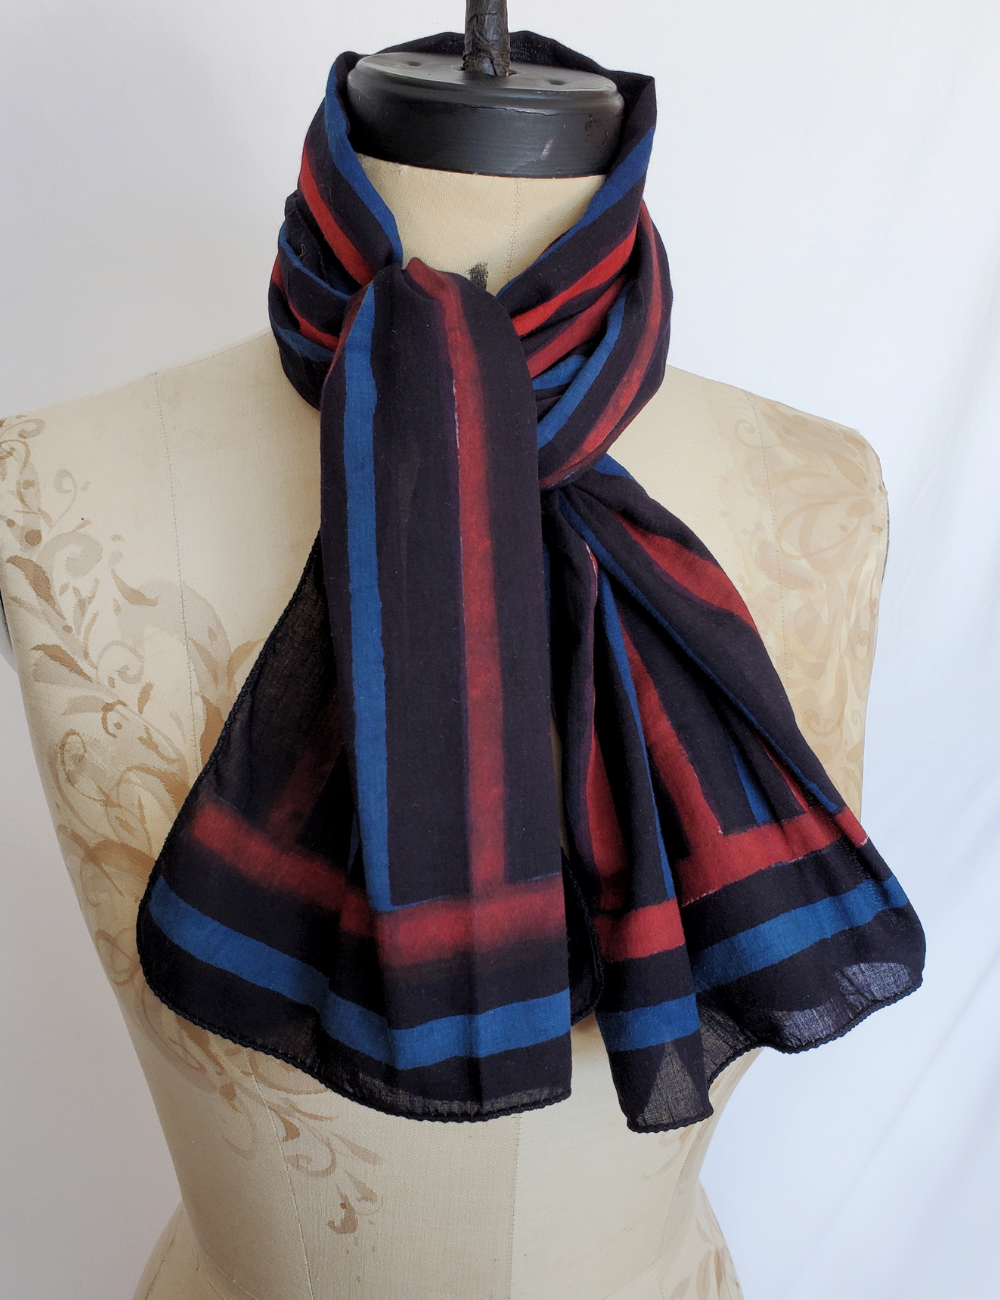 Blue, red and black striped hand block print scarf. The black stripe is the thickest and most prominent.